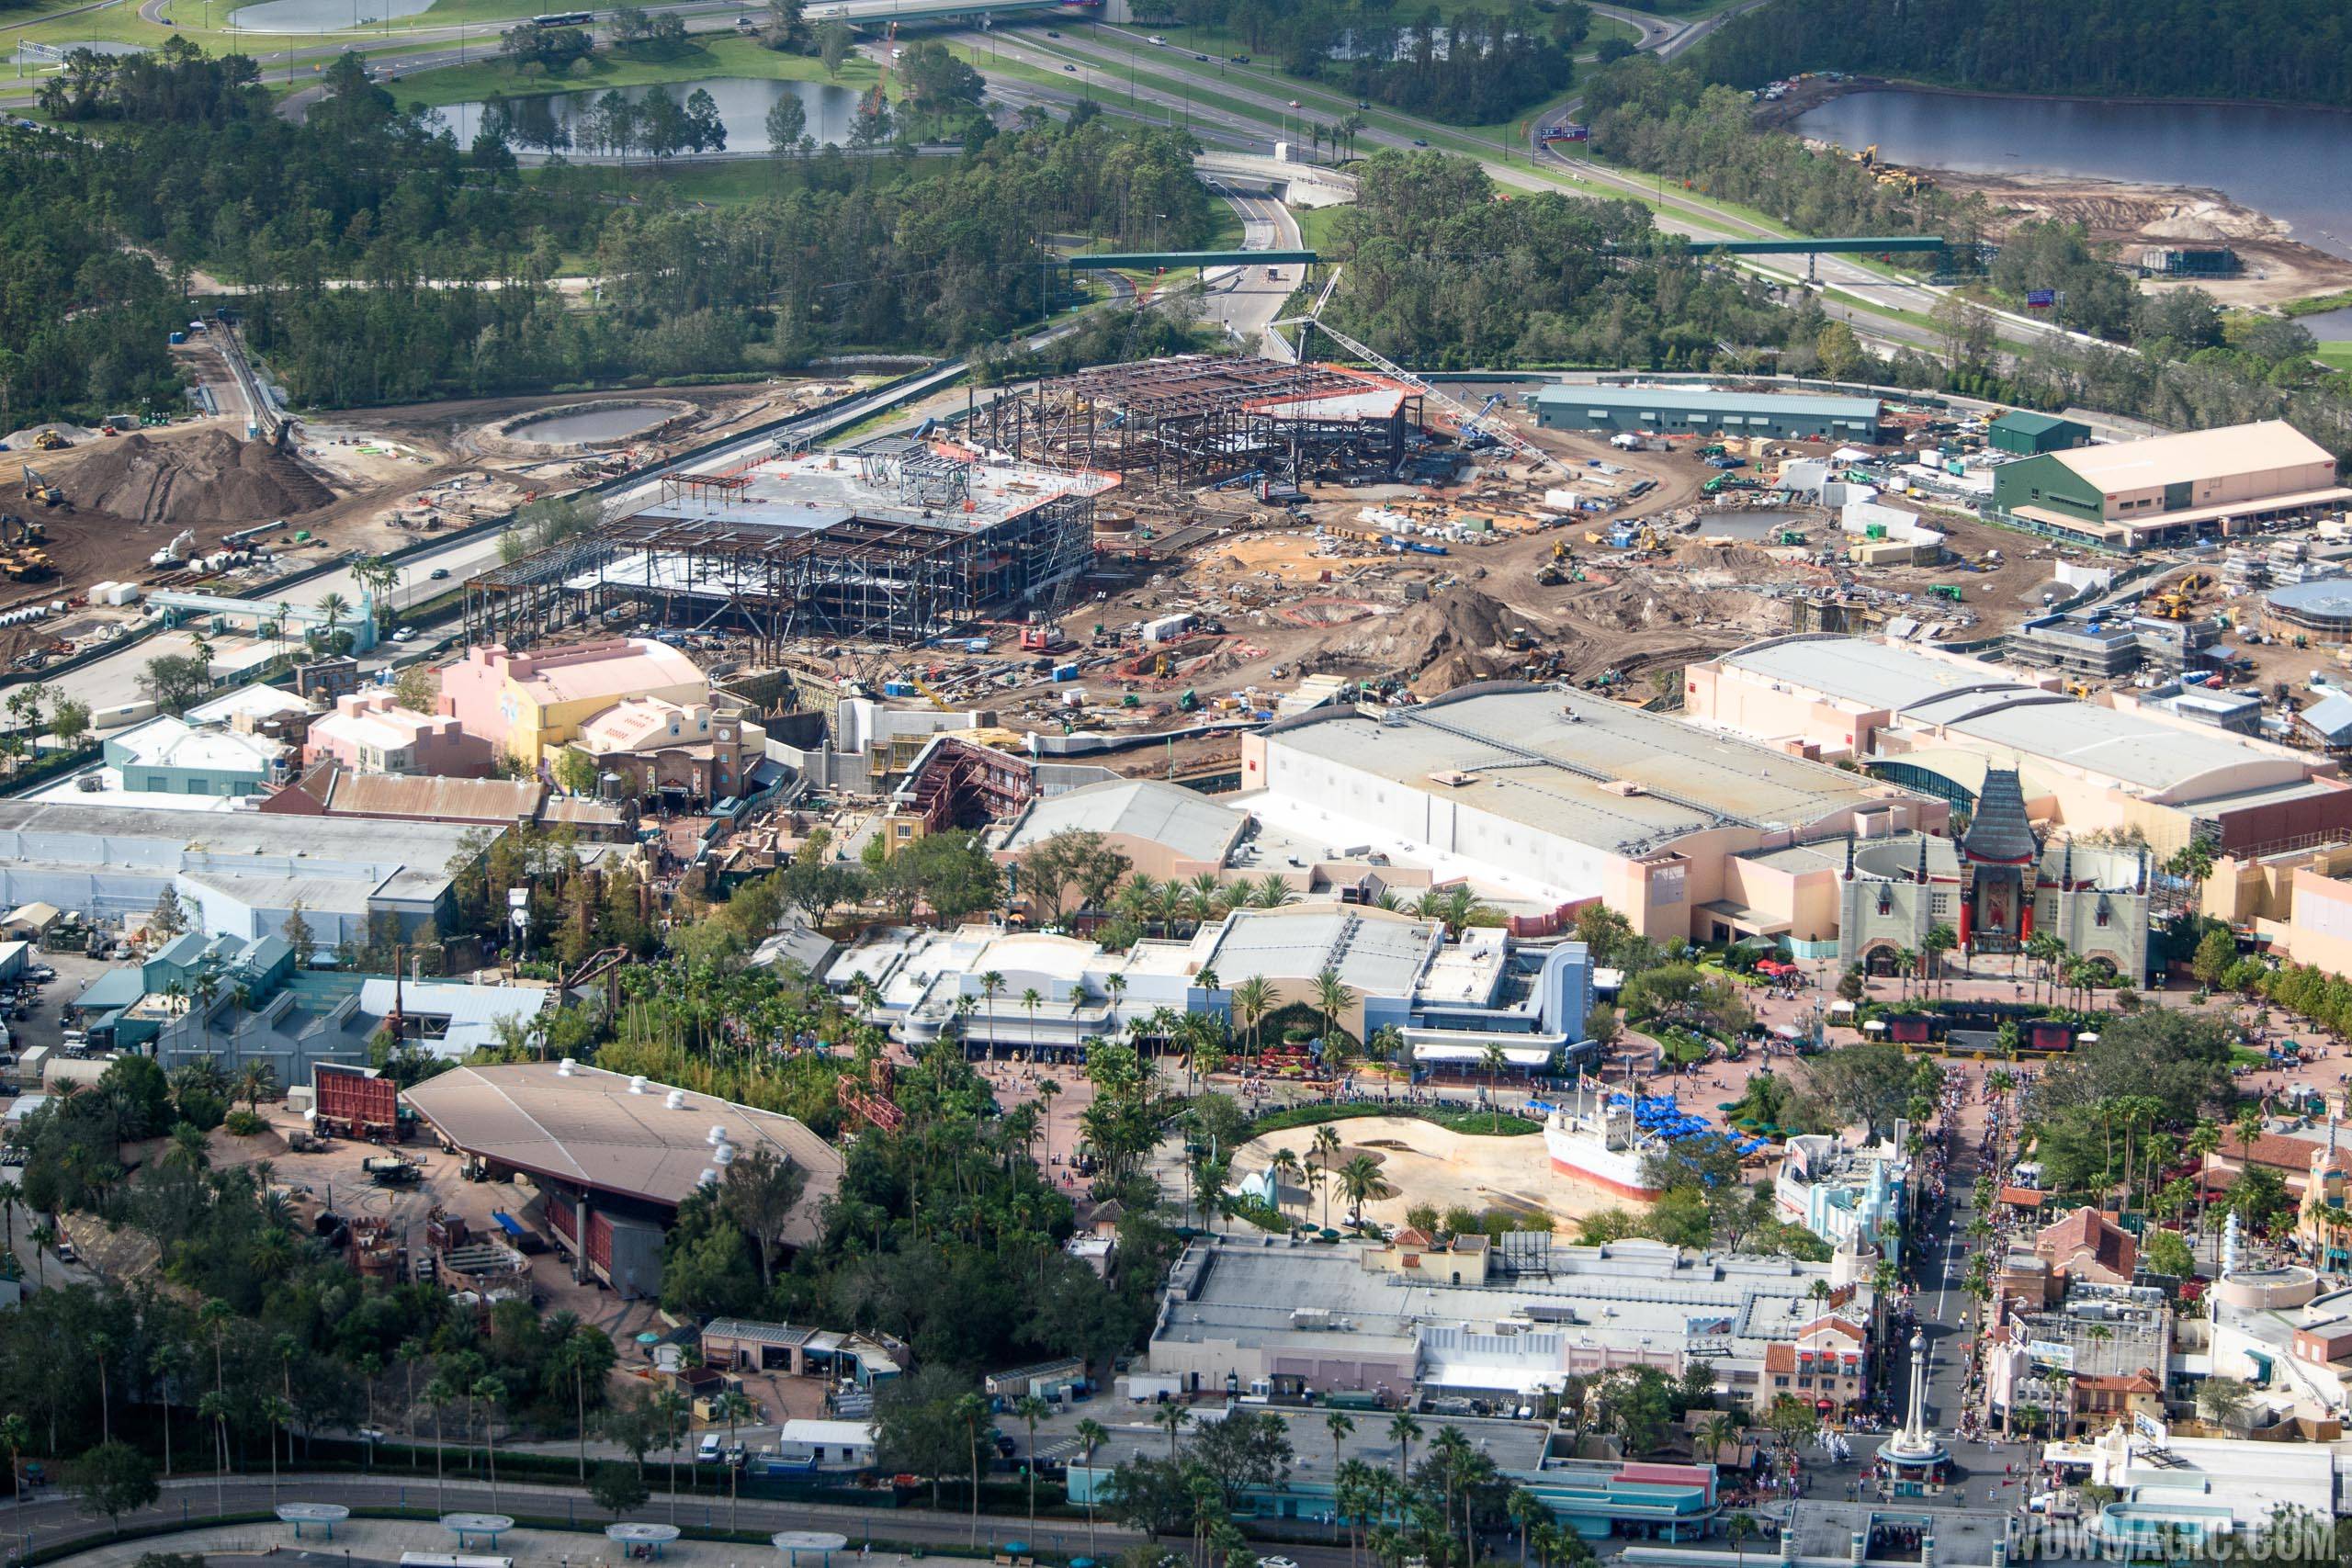 Wide view of Star Wars Galaxy's Edge at Disney's Hollywood Studios